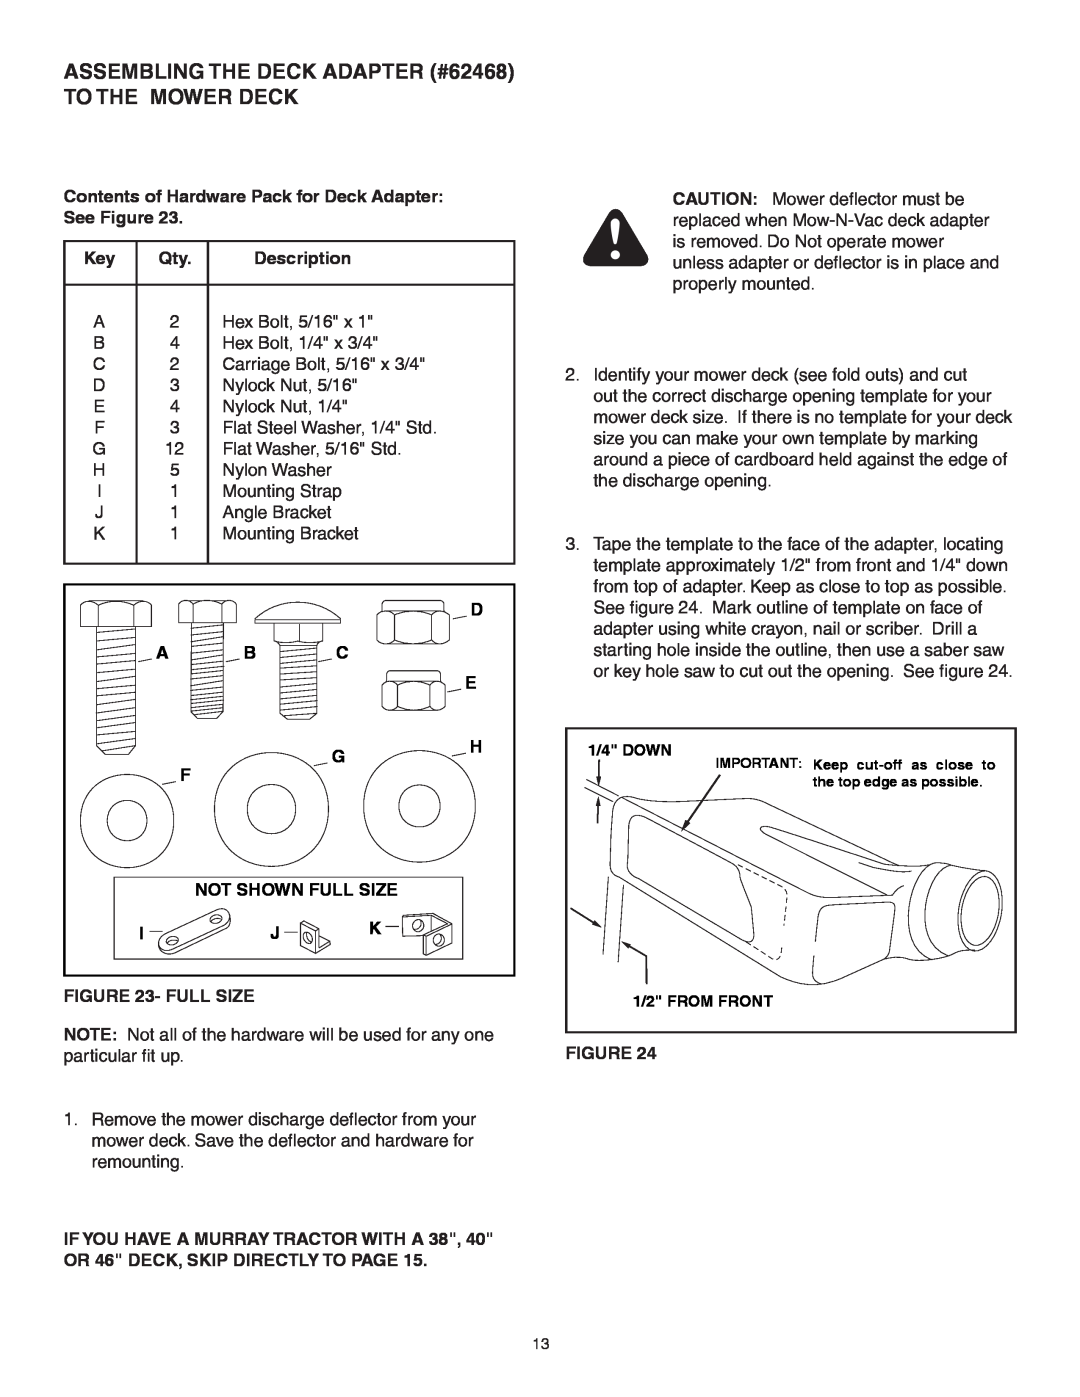 Sears 552493 ASSEMBLING THE DECK ADAPTER #62468 TO THE MOWER DECK, Contents of Hardware Pack for Deck Adapter See Figure 